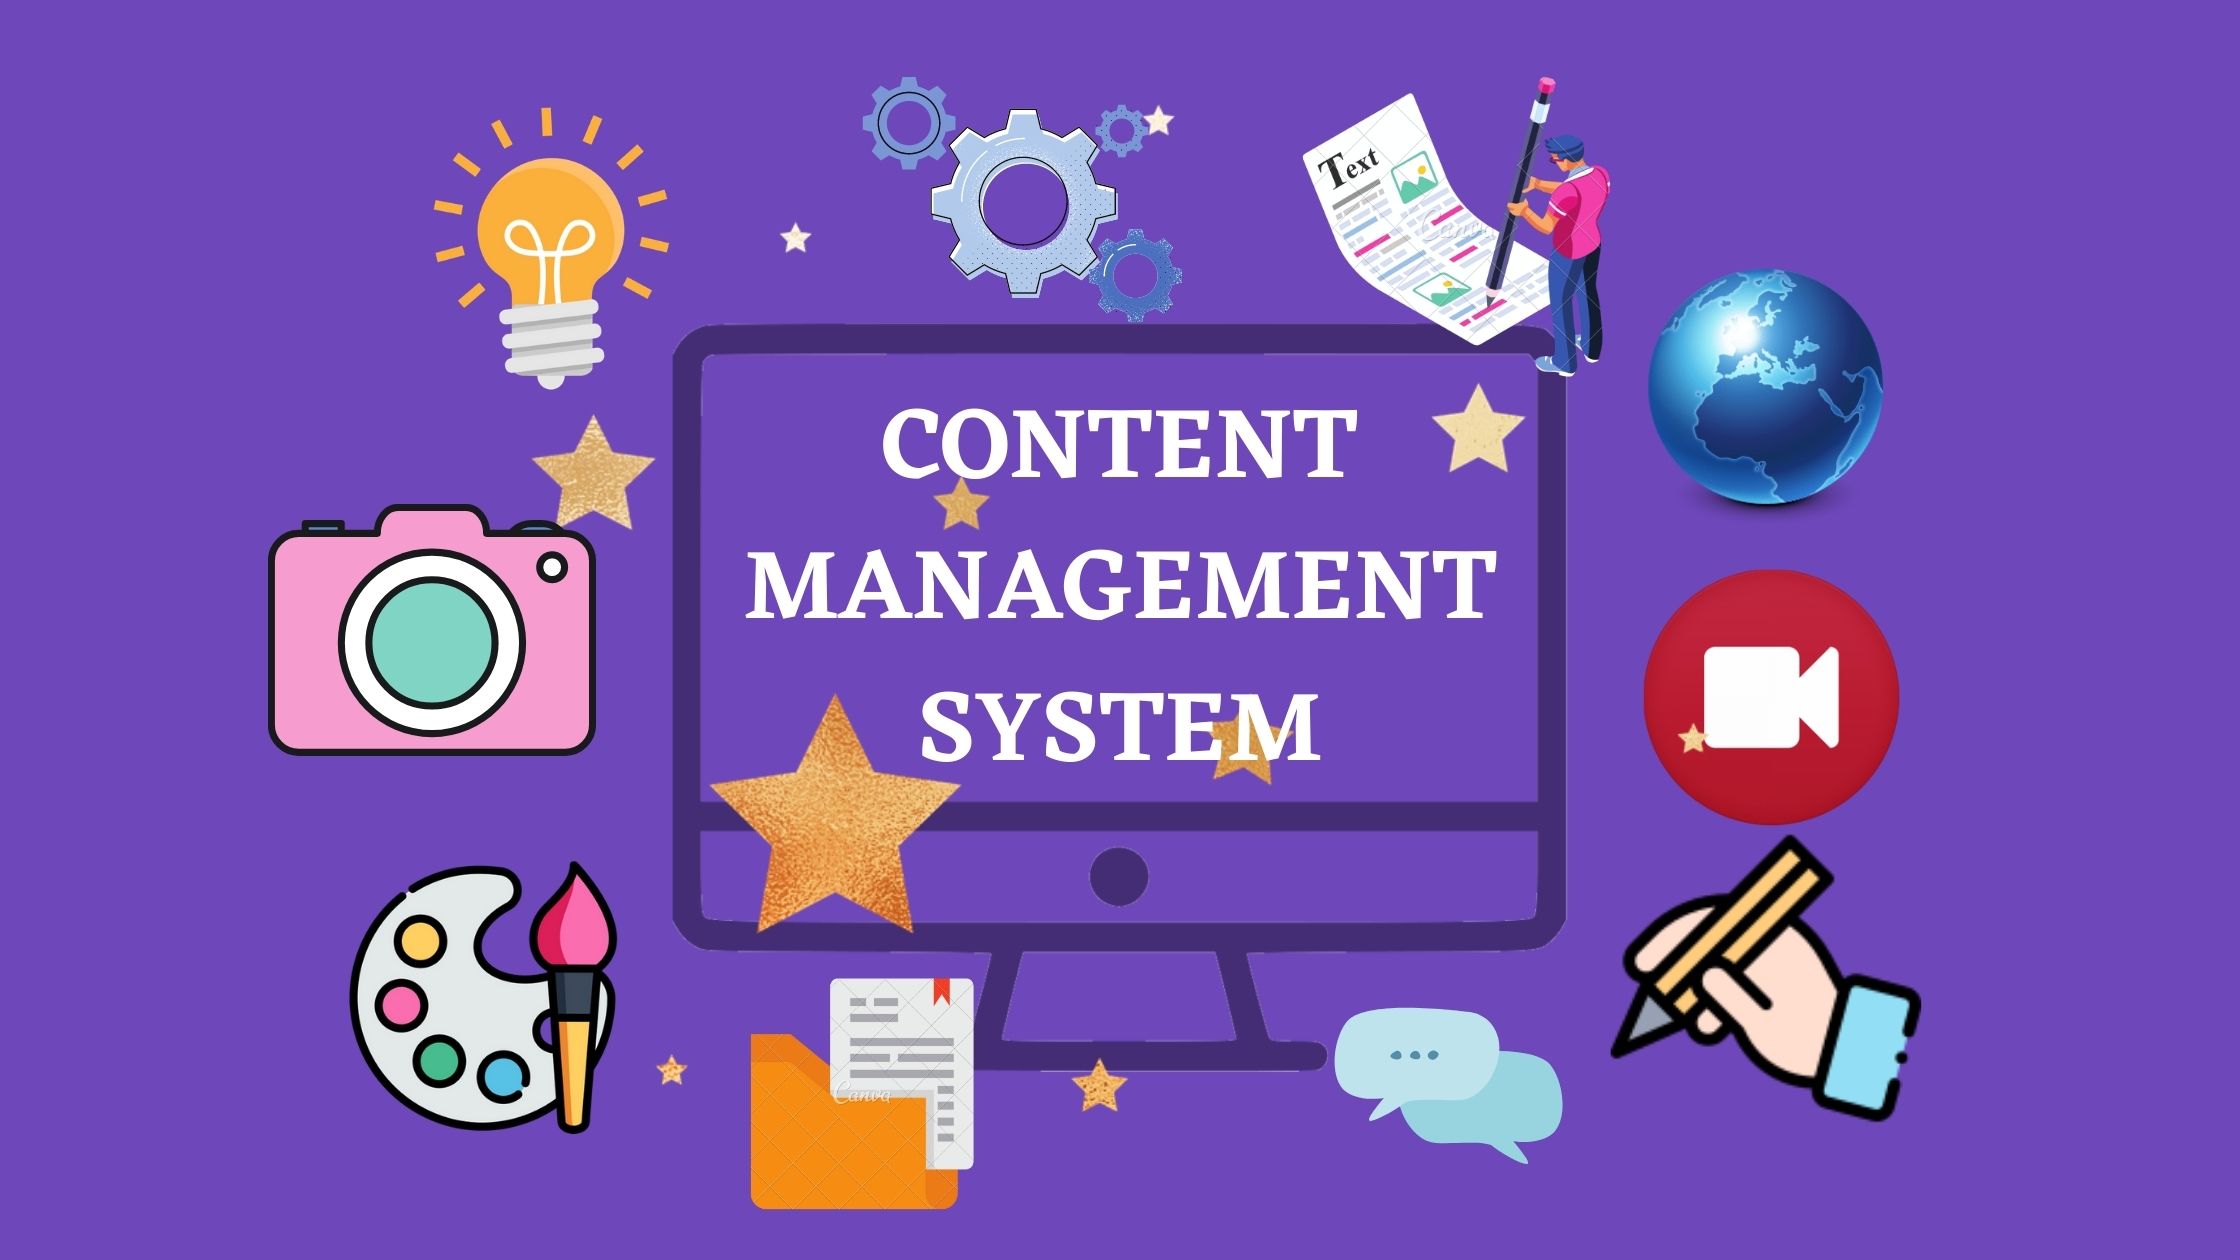 What is Content Management System?